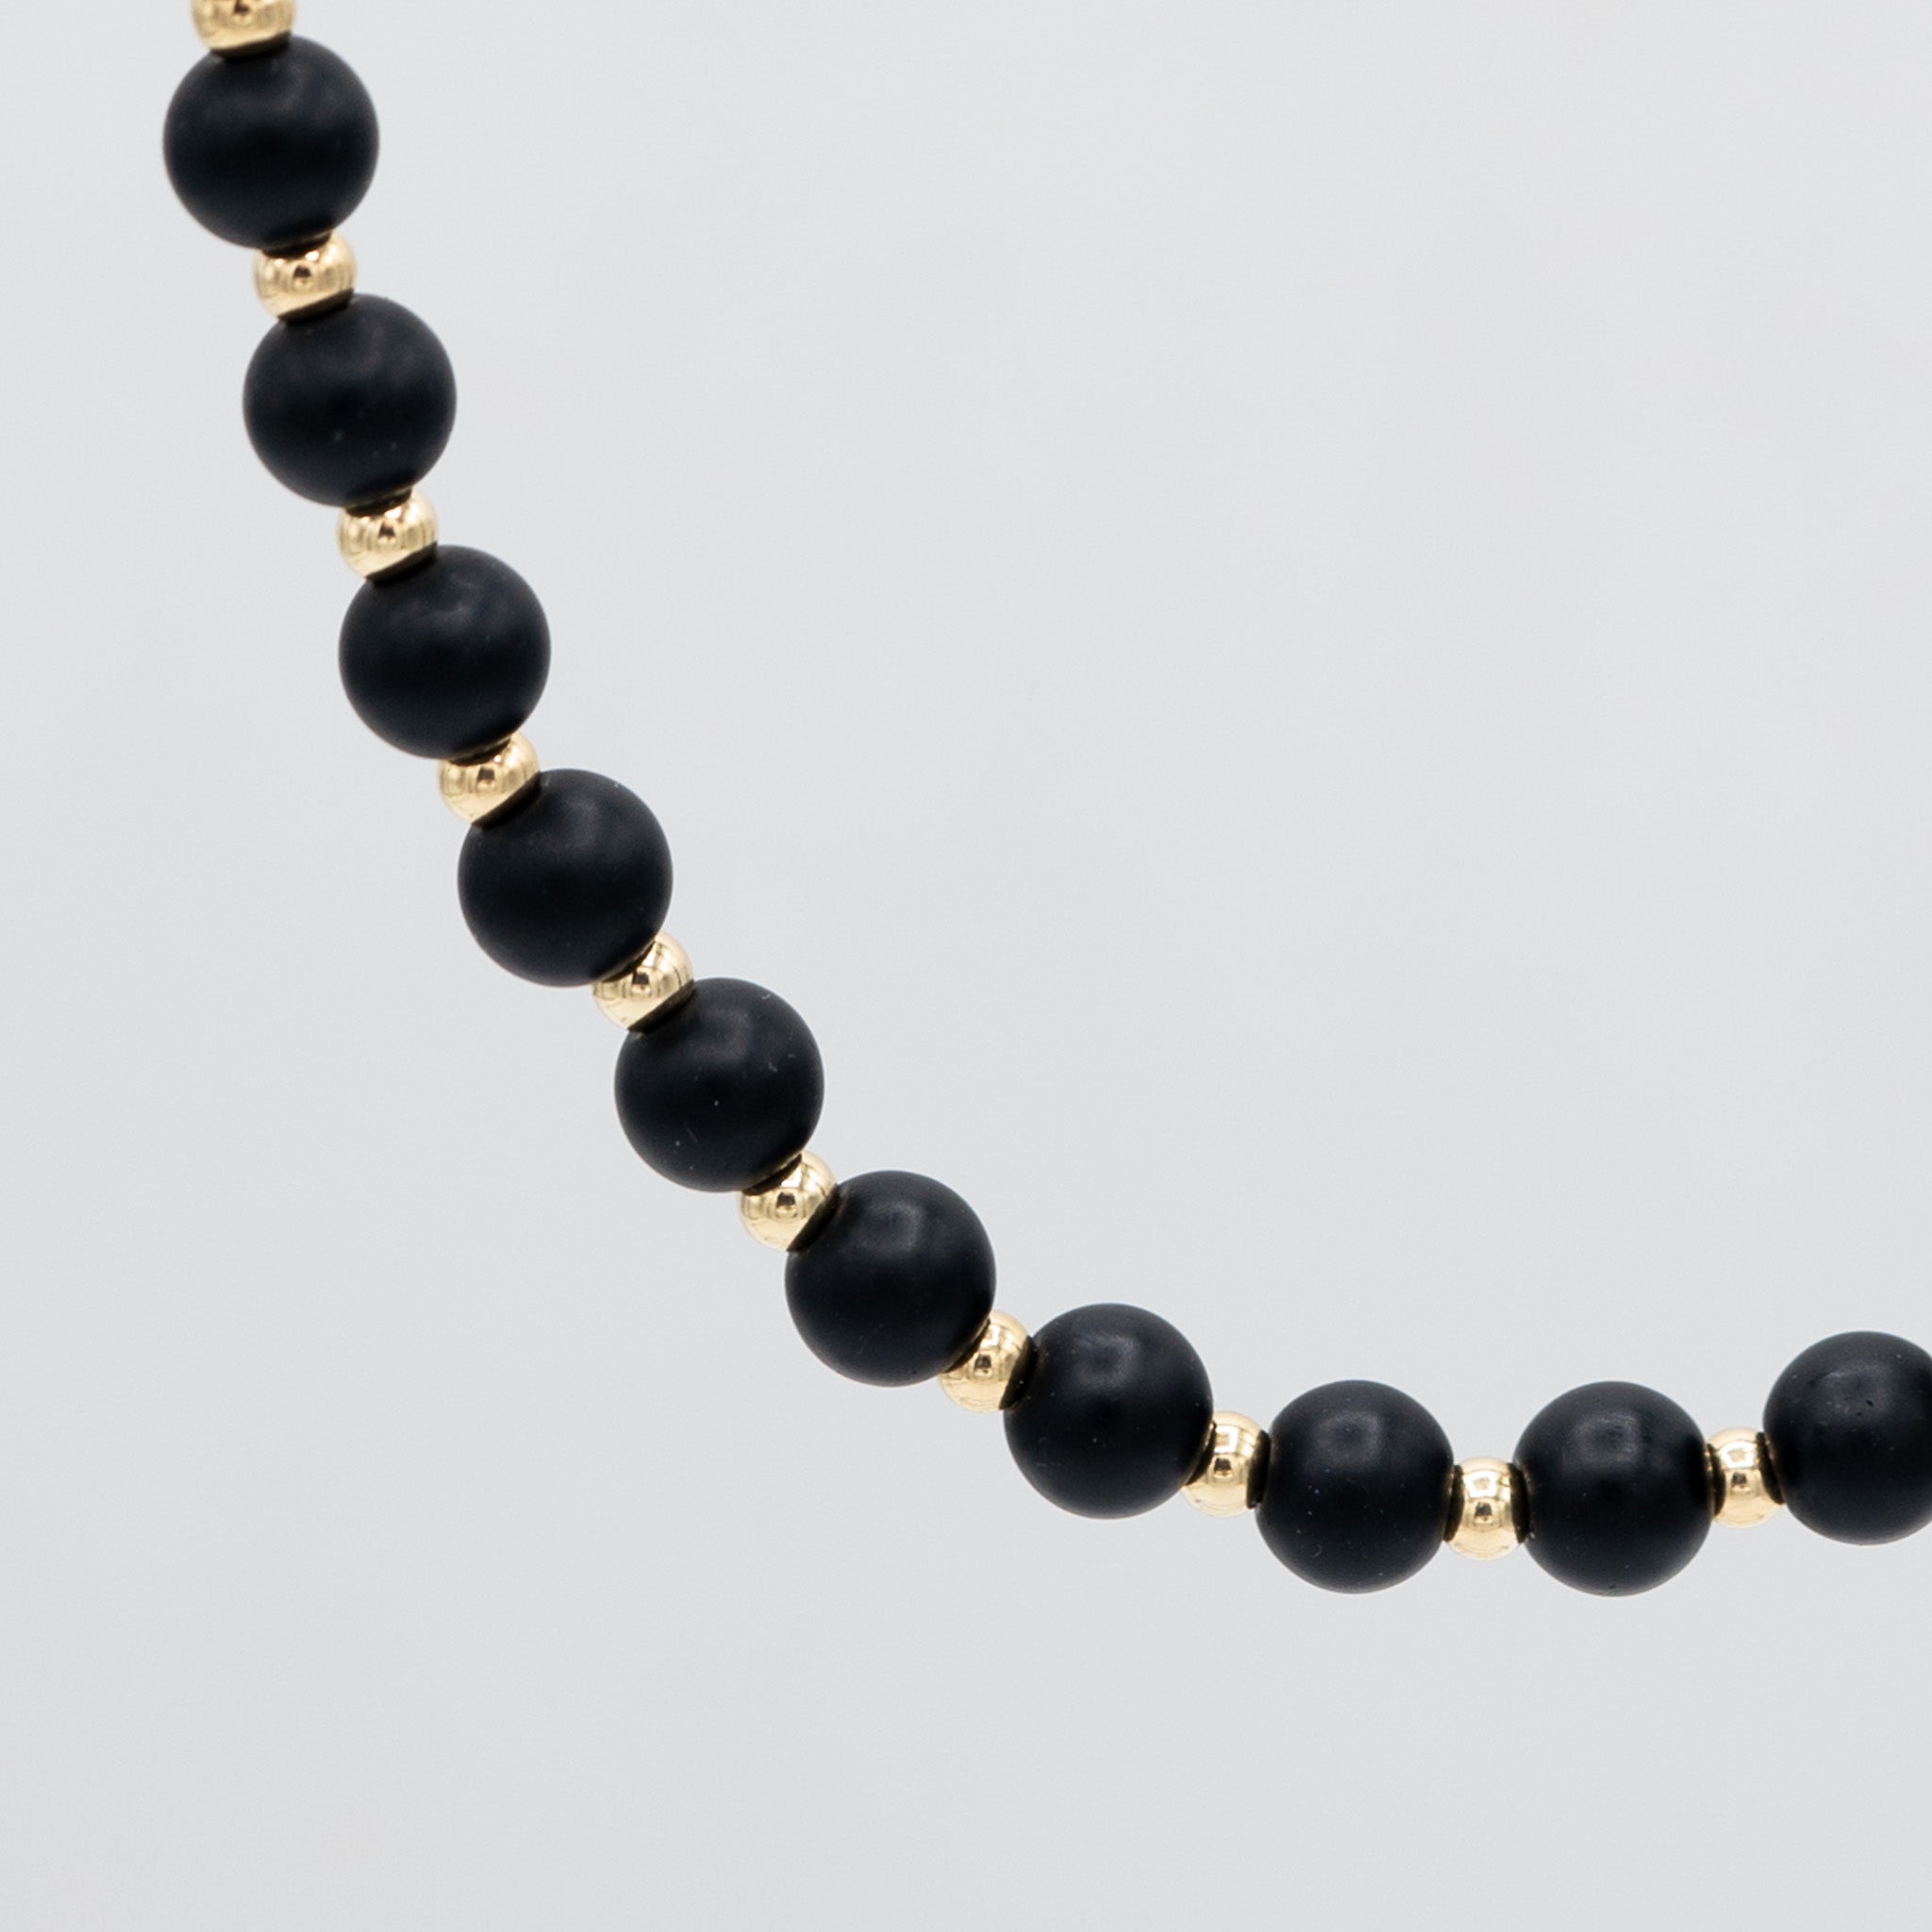 Onyx Gemstone Faceted TearDrop Shaped Bead Necklace NS-1342 – Online  Gemstone & Jewelry Store By Gehna Jaipur